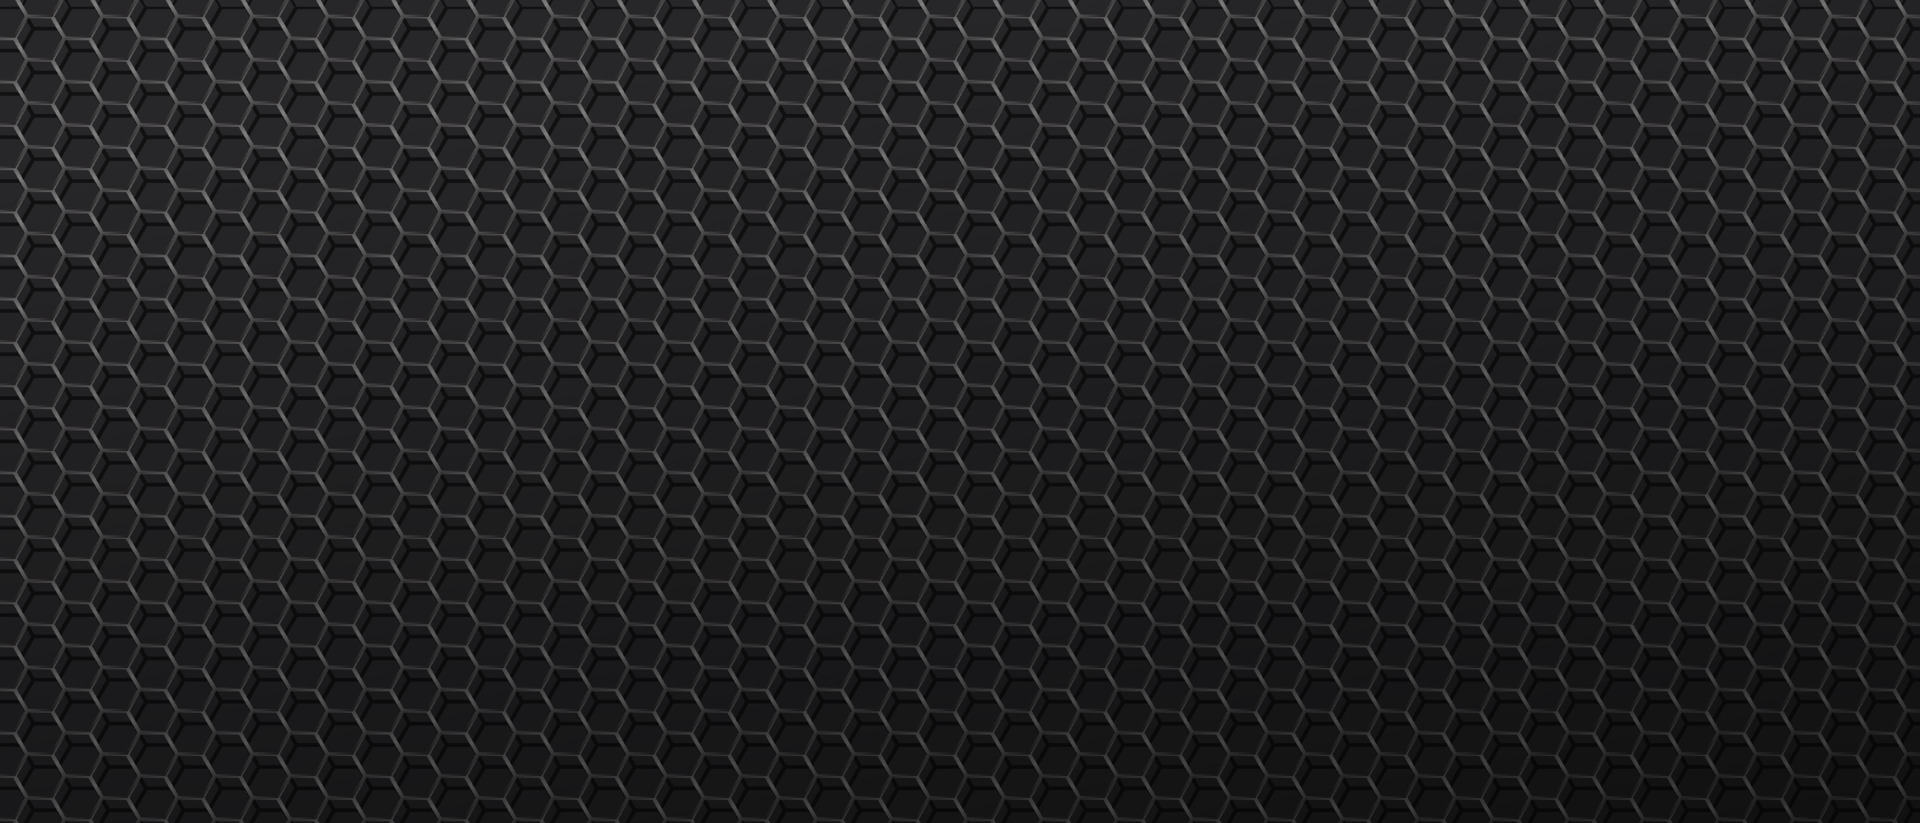 Fine Mesh Plastic Mesh For Texture And Background Black Background Of  Pentagonal Cells Honeycombs Stock Photo - Download Image Now - iStock